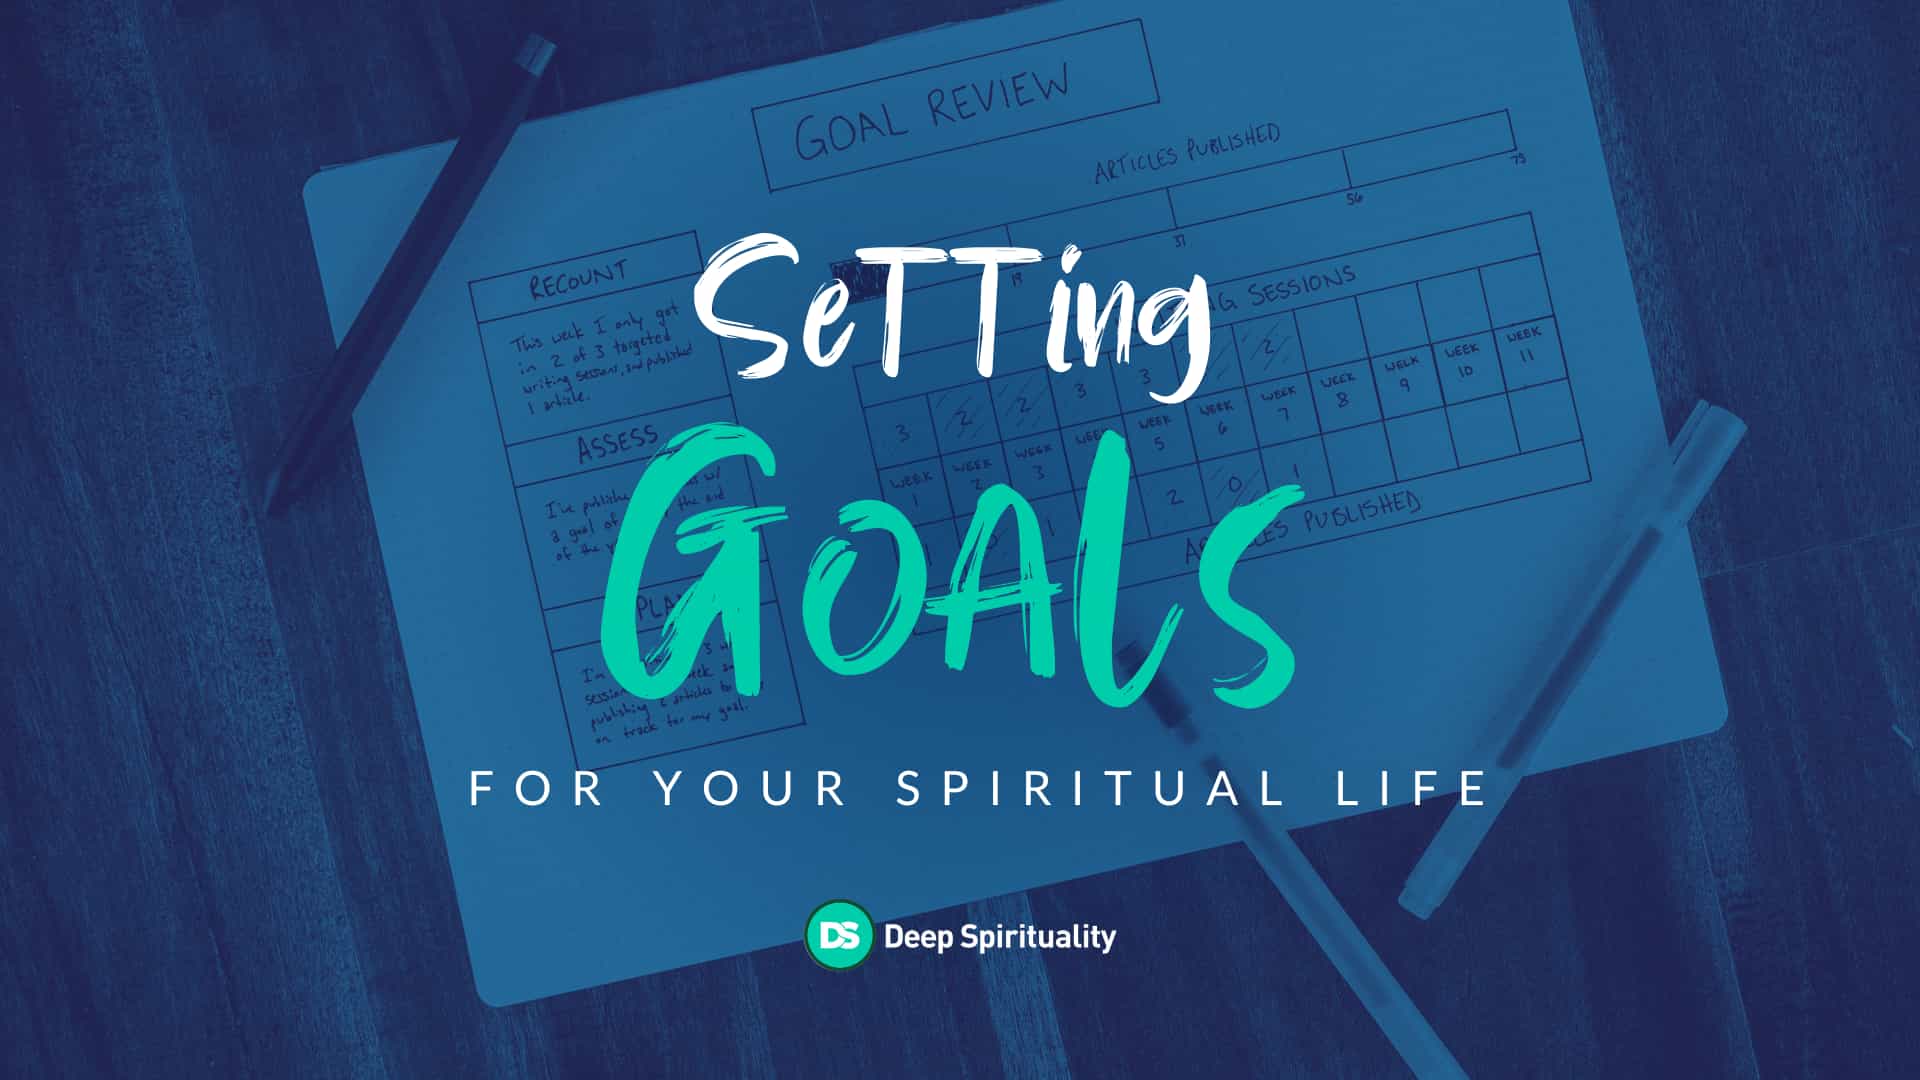 How to Set Goals for Your Spiritual Life 5